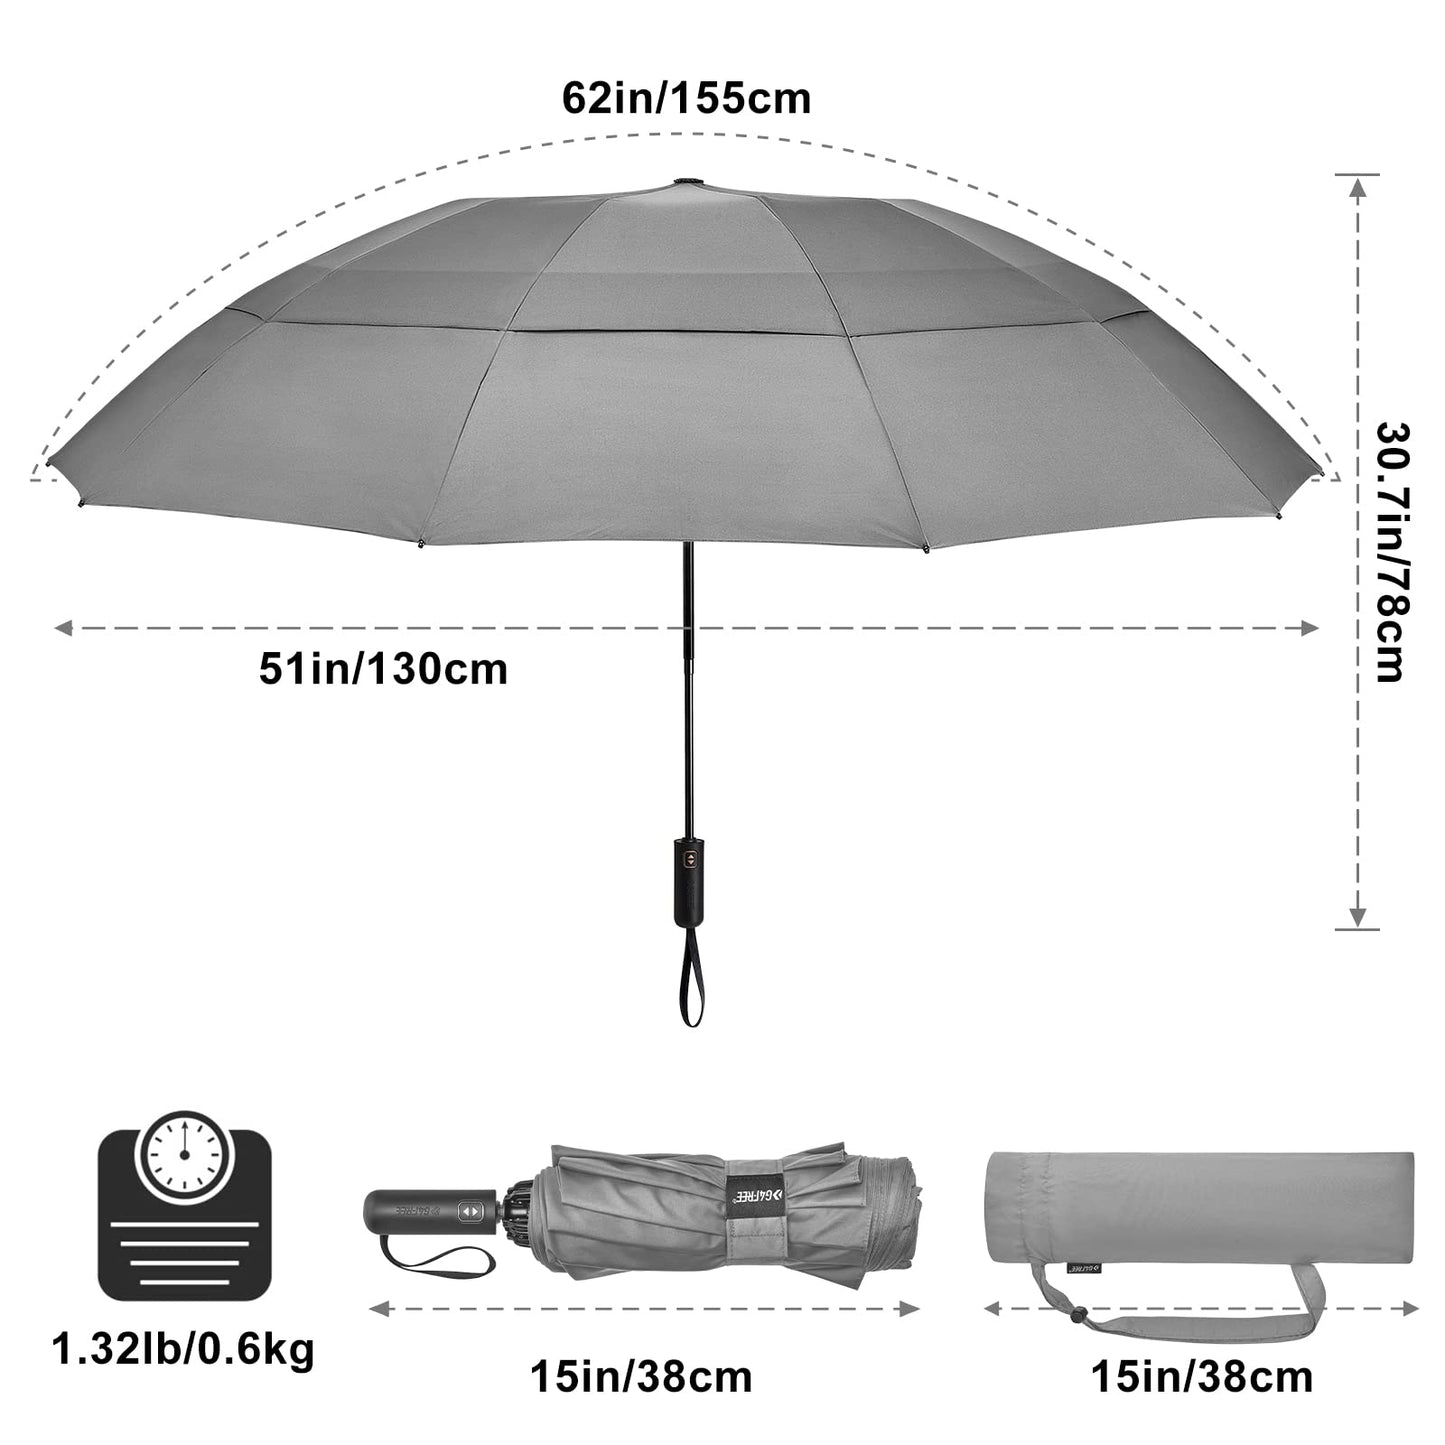 G4Free 46/54/62 Inch Large Compact Golf Umbrella Windproof 10 Ribs